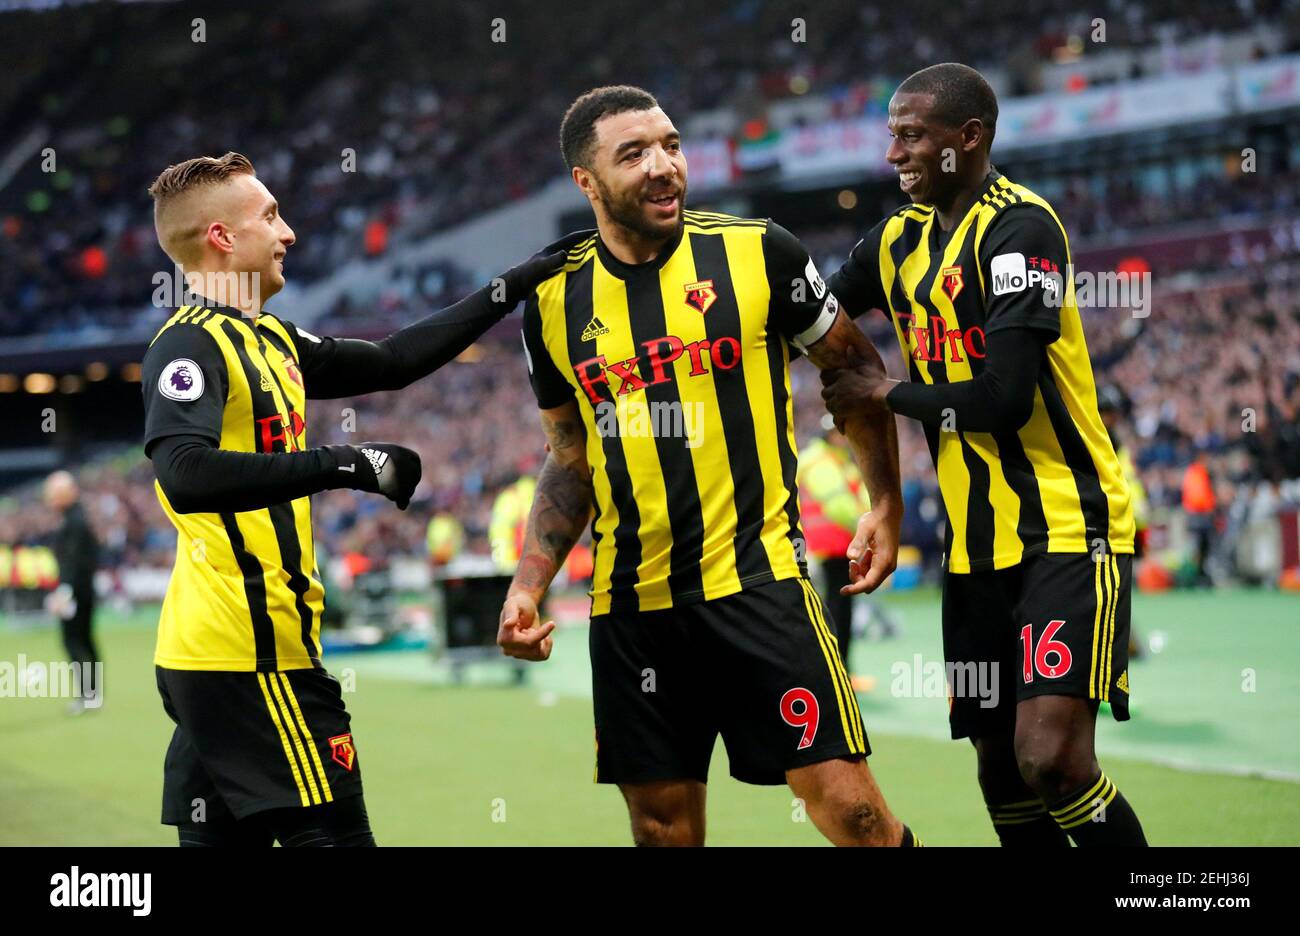 Soccer Football - Premier League - West Ham United v Watford - London Stadium, London, Britain - December 22, 2018  Watford's Troy Deeney celebrates scoring their first goal with Abdoulaye Doucoure and Gerard Deulofeu   REUTERS/Eddie Keogh  EDITORIAL USE ONLY. No use with unauthorized audio, video, data, fixture lists, club/league logos or 'live' services. Online in-match use limited to 75 images, no video emulation. No use in betting, games or single club/league/player publications.  Please contact your account representative for further details. Stock Photo